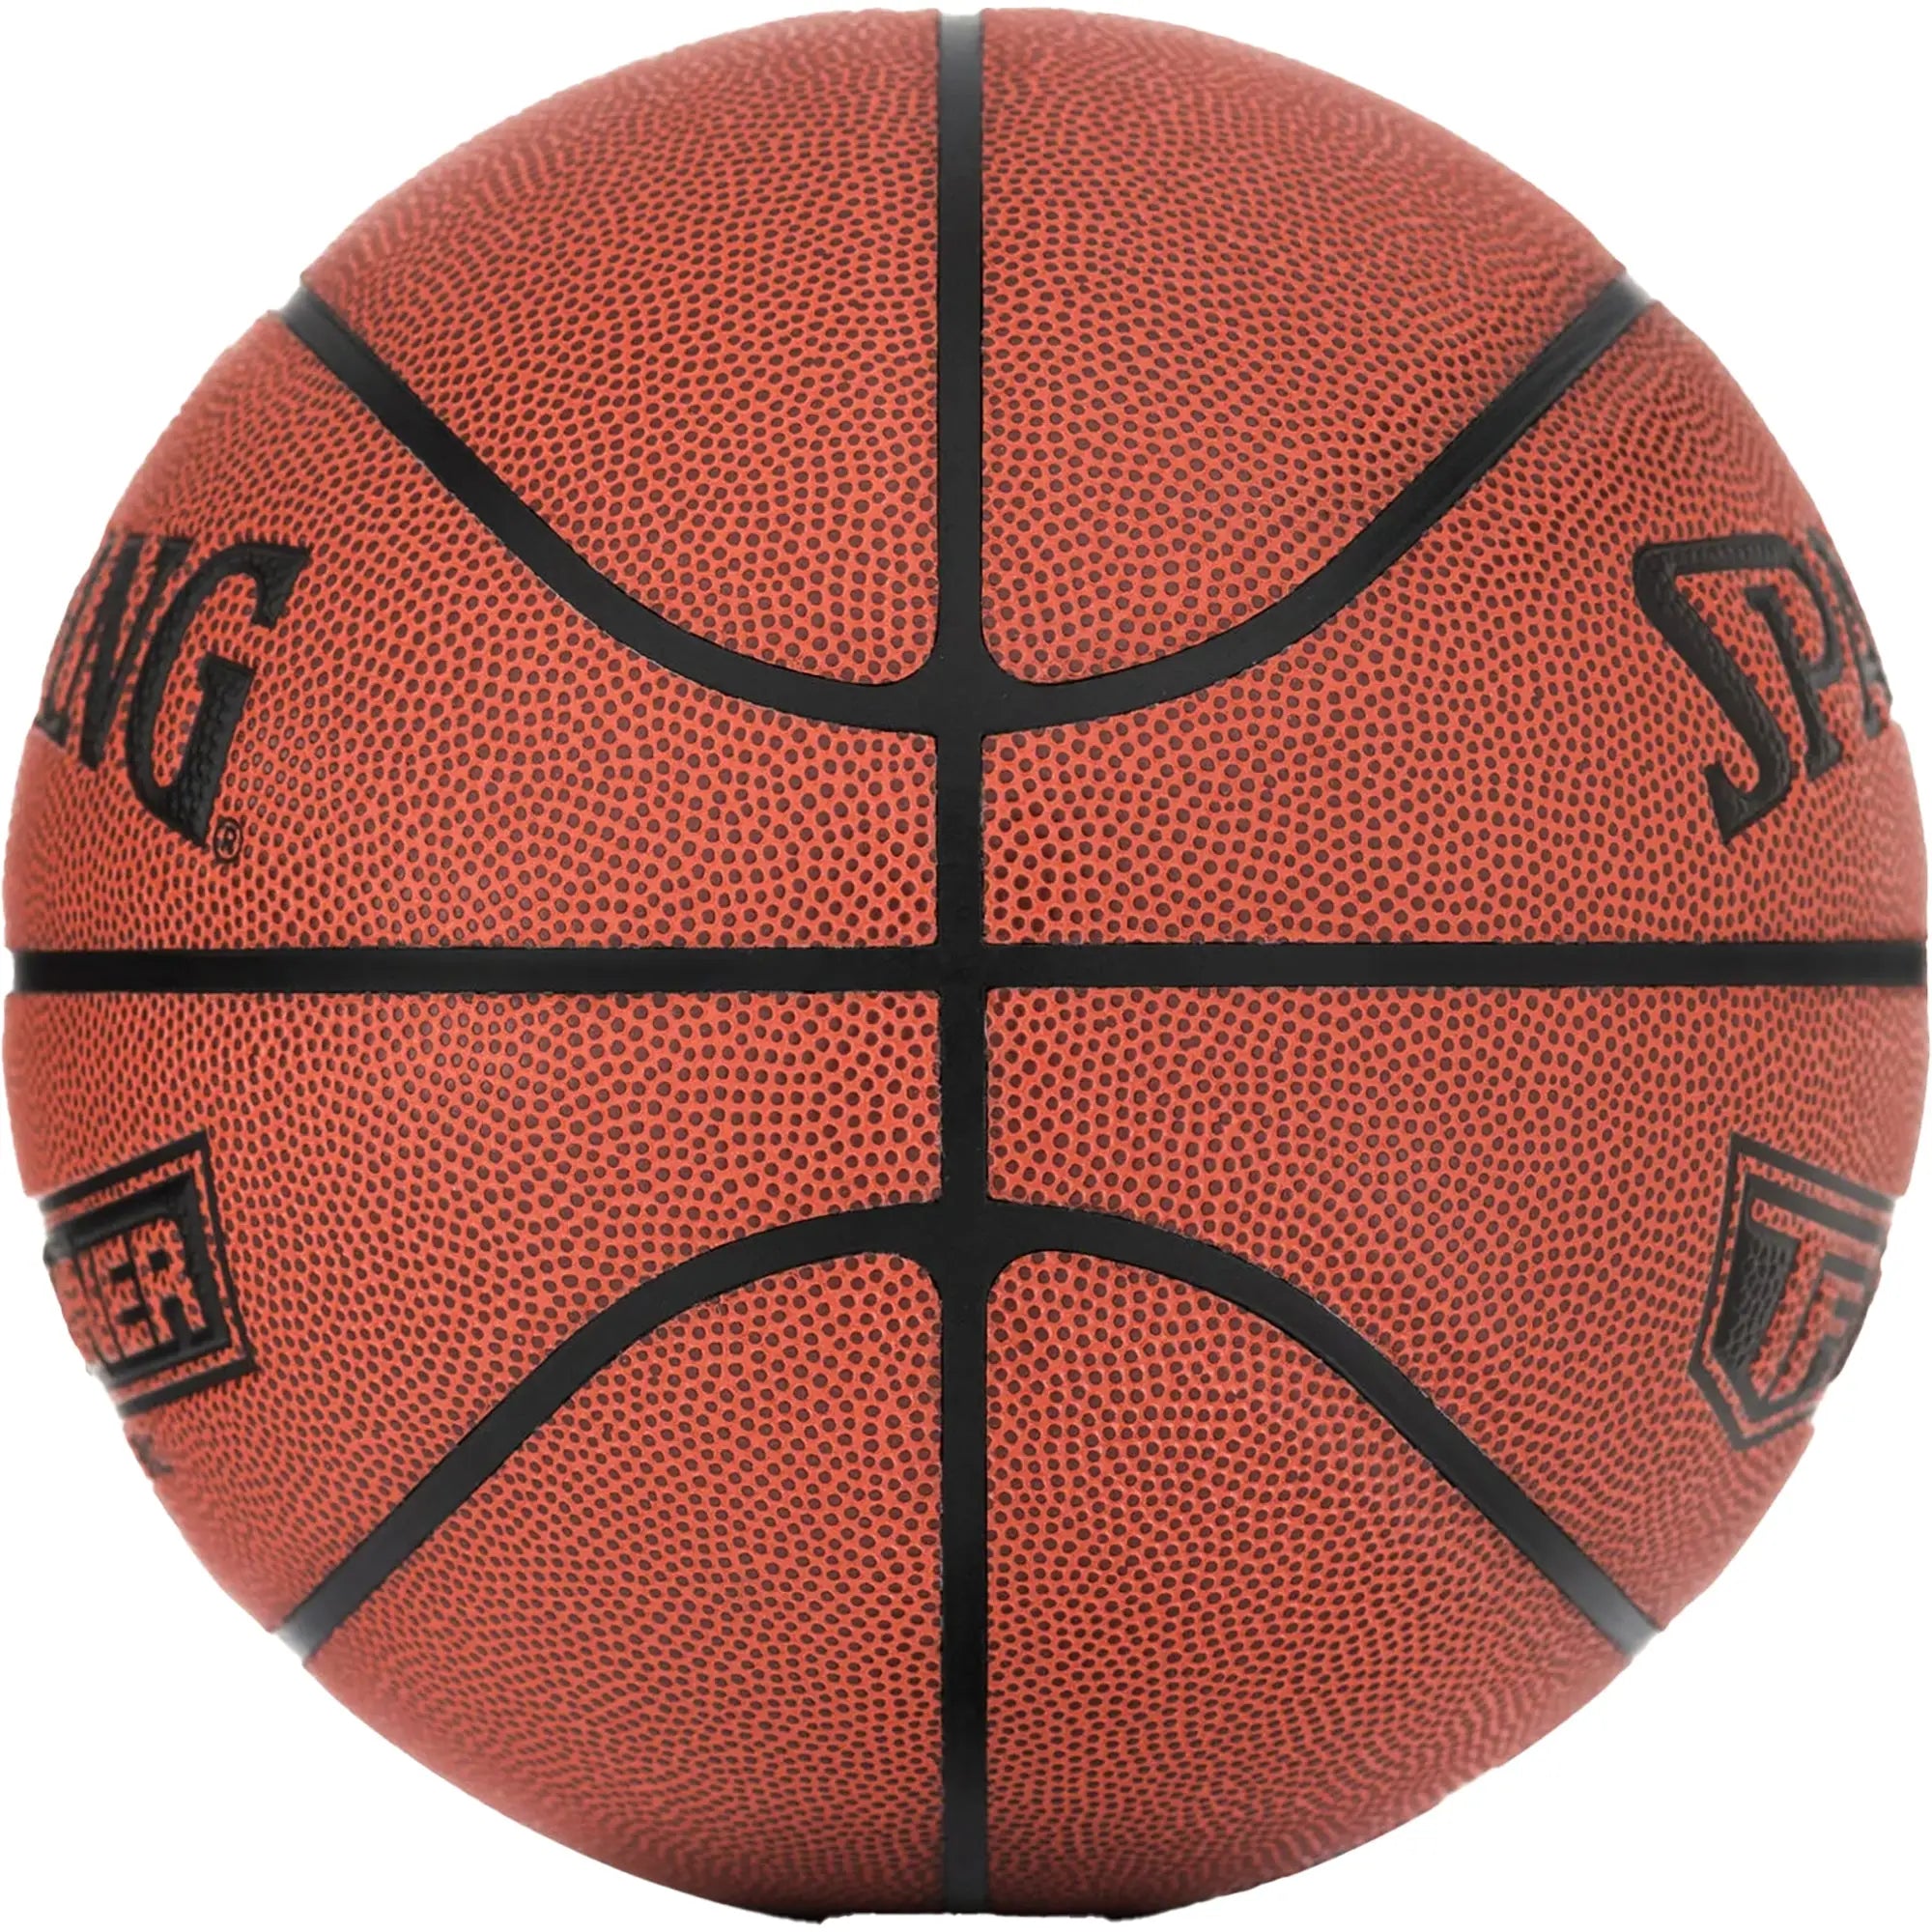 Spalding 29.5 Inch TF Trainer Weighted Indoor Basketball Spalding